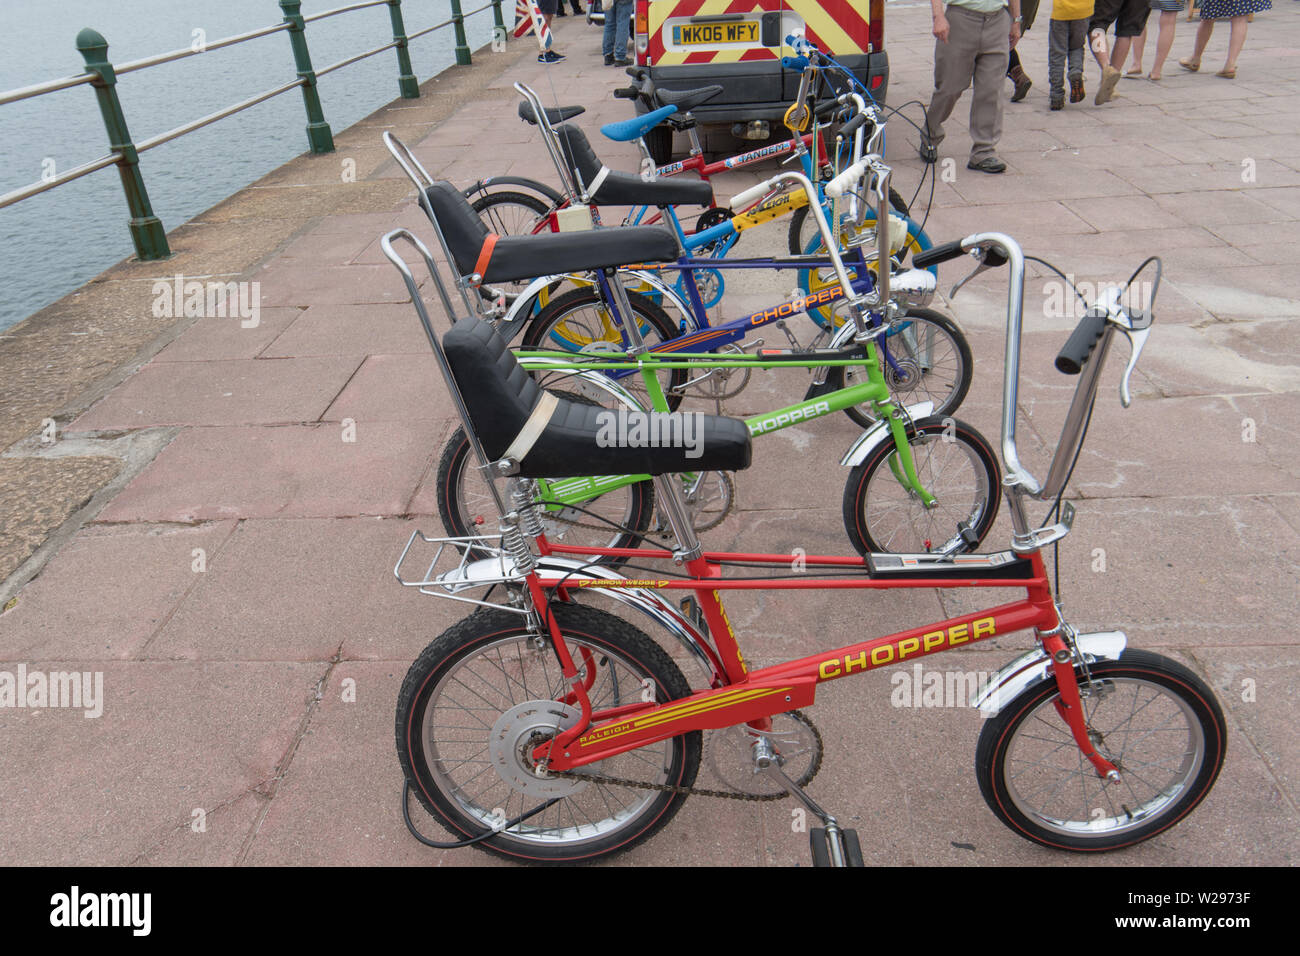 Raleigh Chopper bikes on exhibition outside on seafront at Penzance, peoples upper bodies cropped out Stock Photo